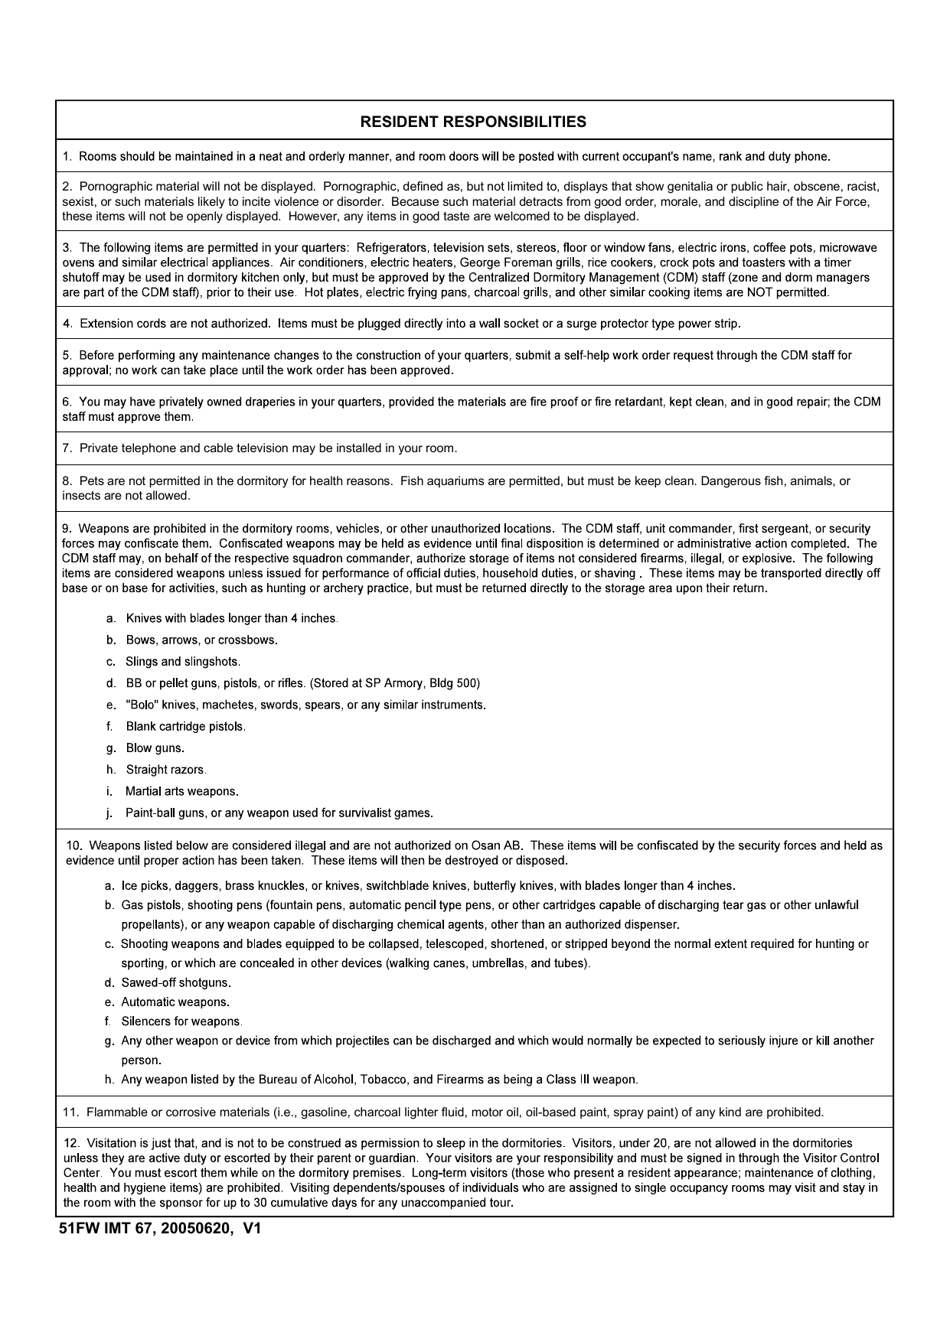 51 FW IMT Form 67 Resident Responsibilities, Page 1